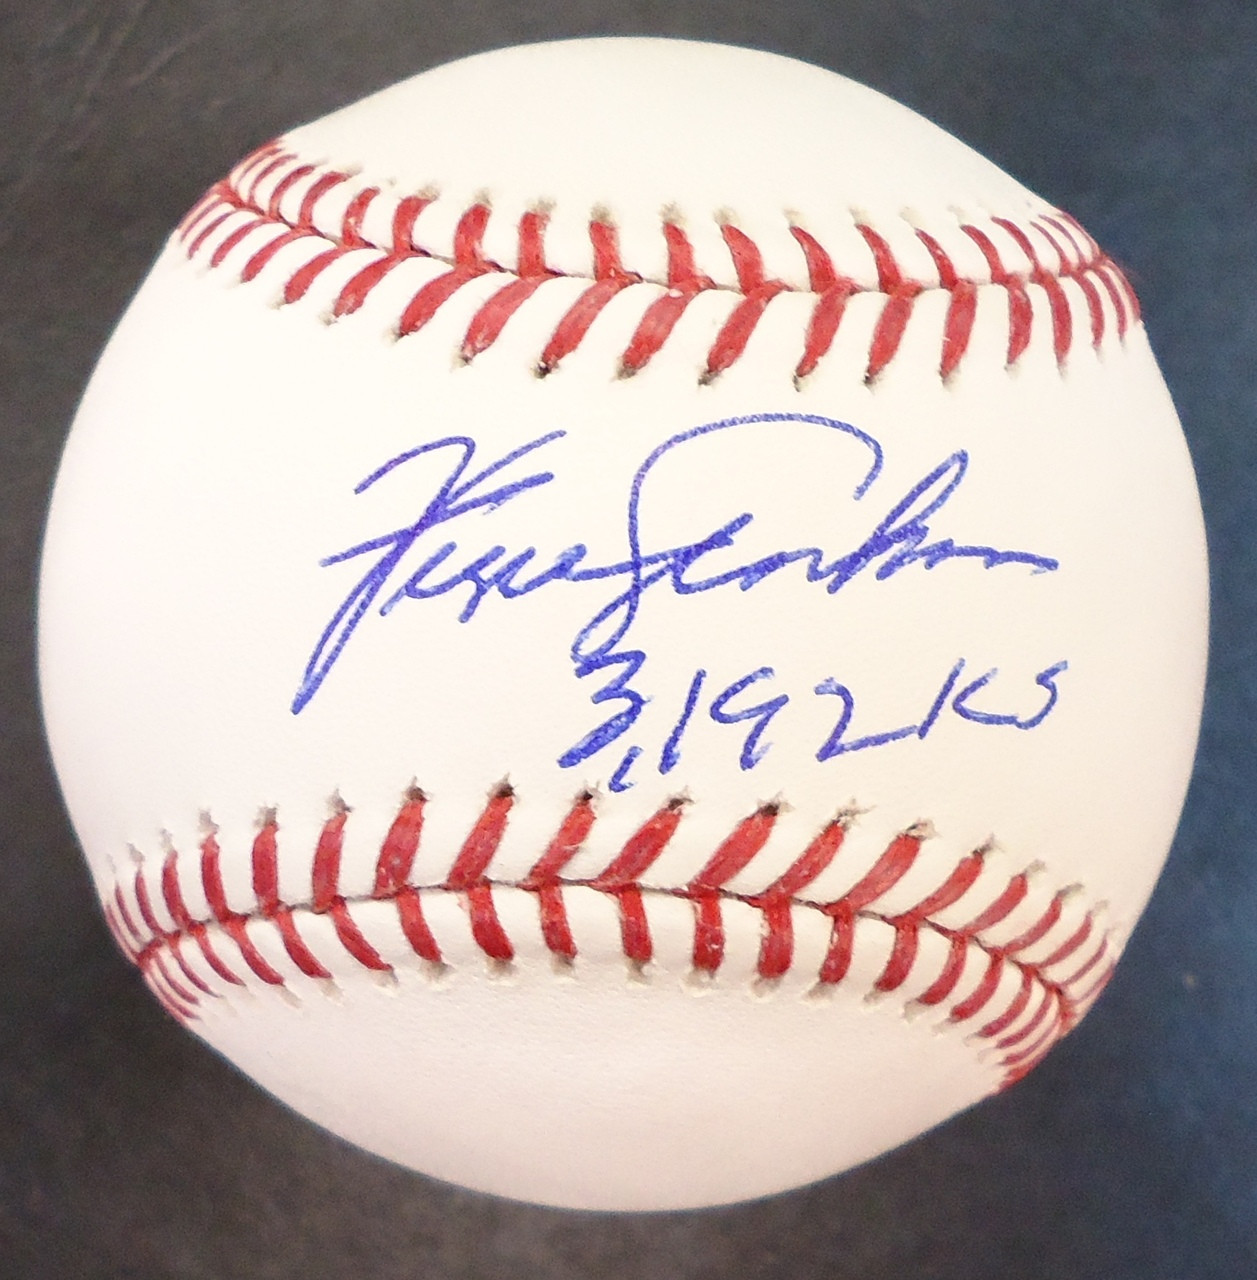 Fergie Jenkins Autographed Baseball - Official Major League Ball Inscribed  3192 K's